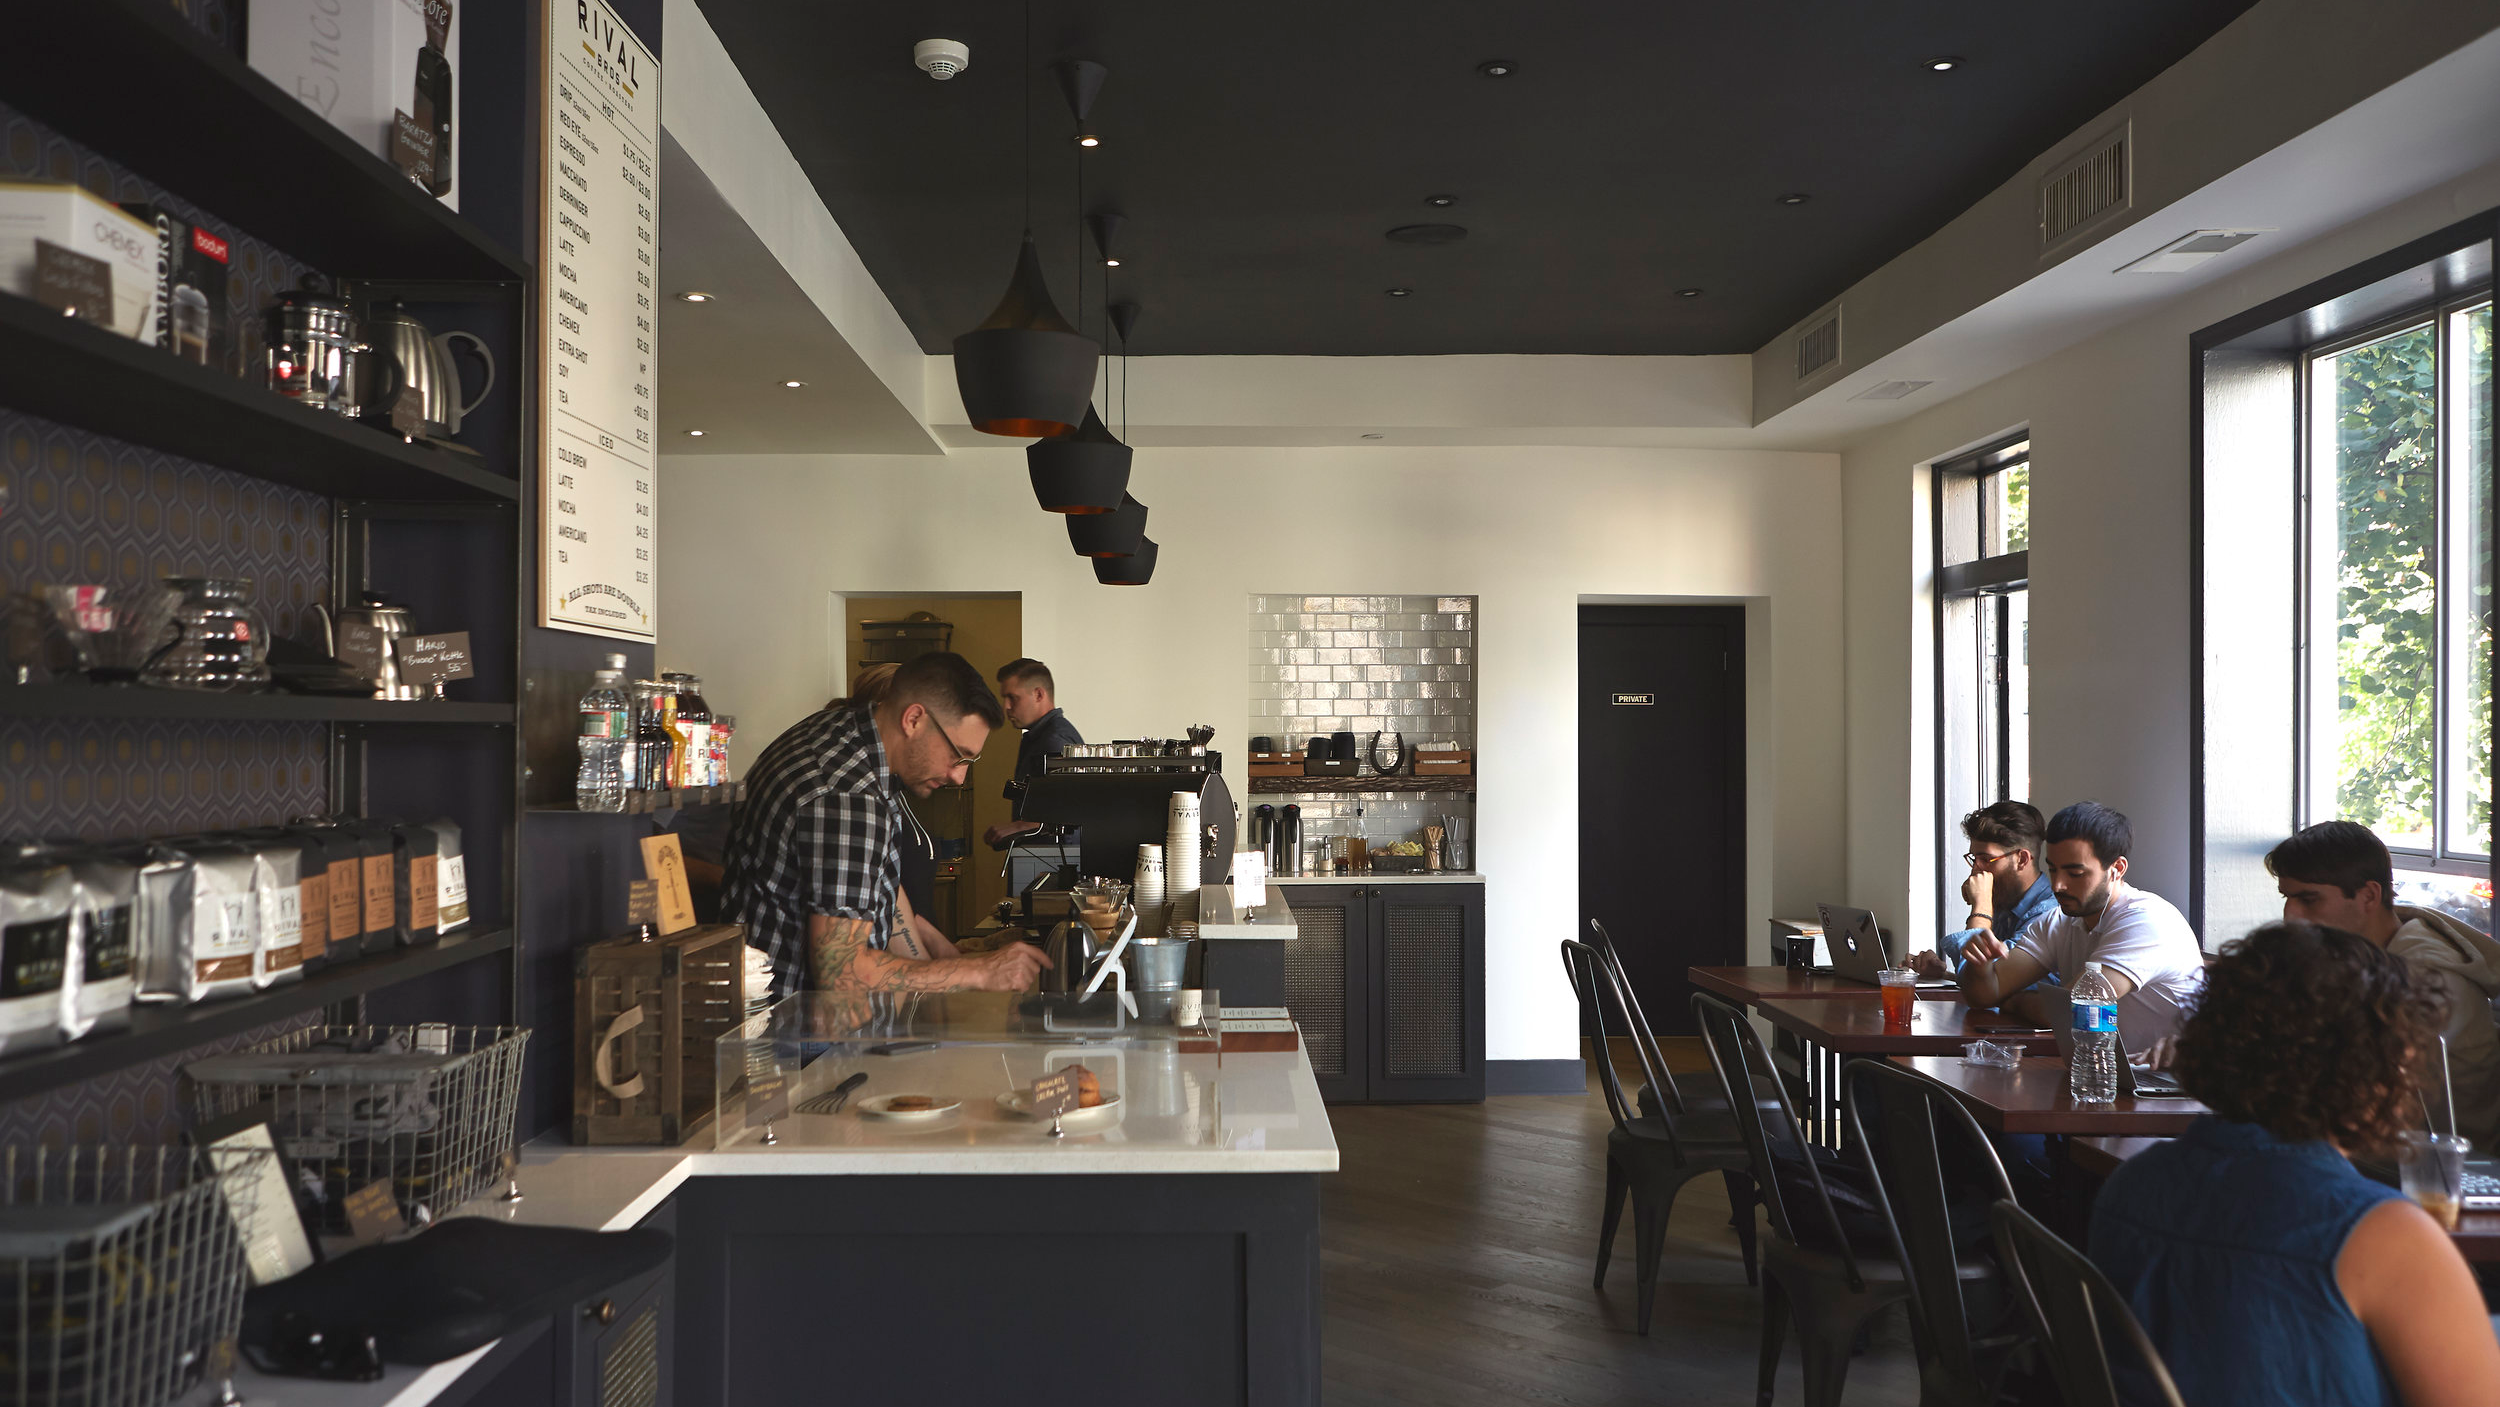 Owner, Damien P., working Rival Bros coffee bar